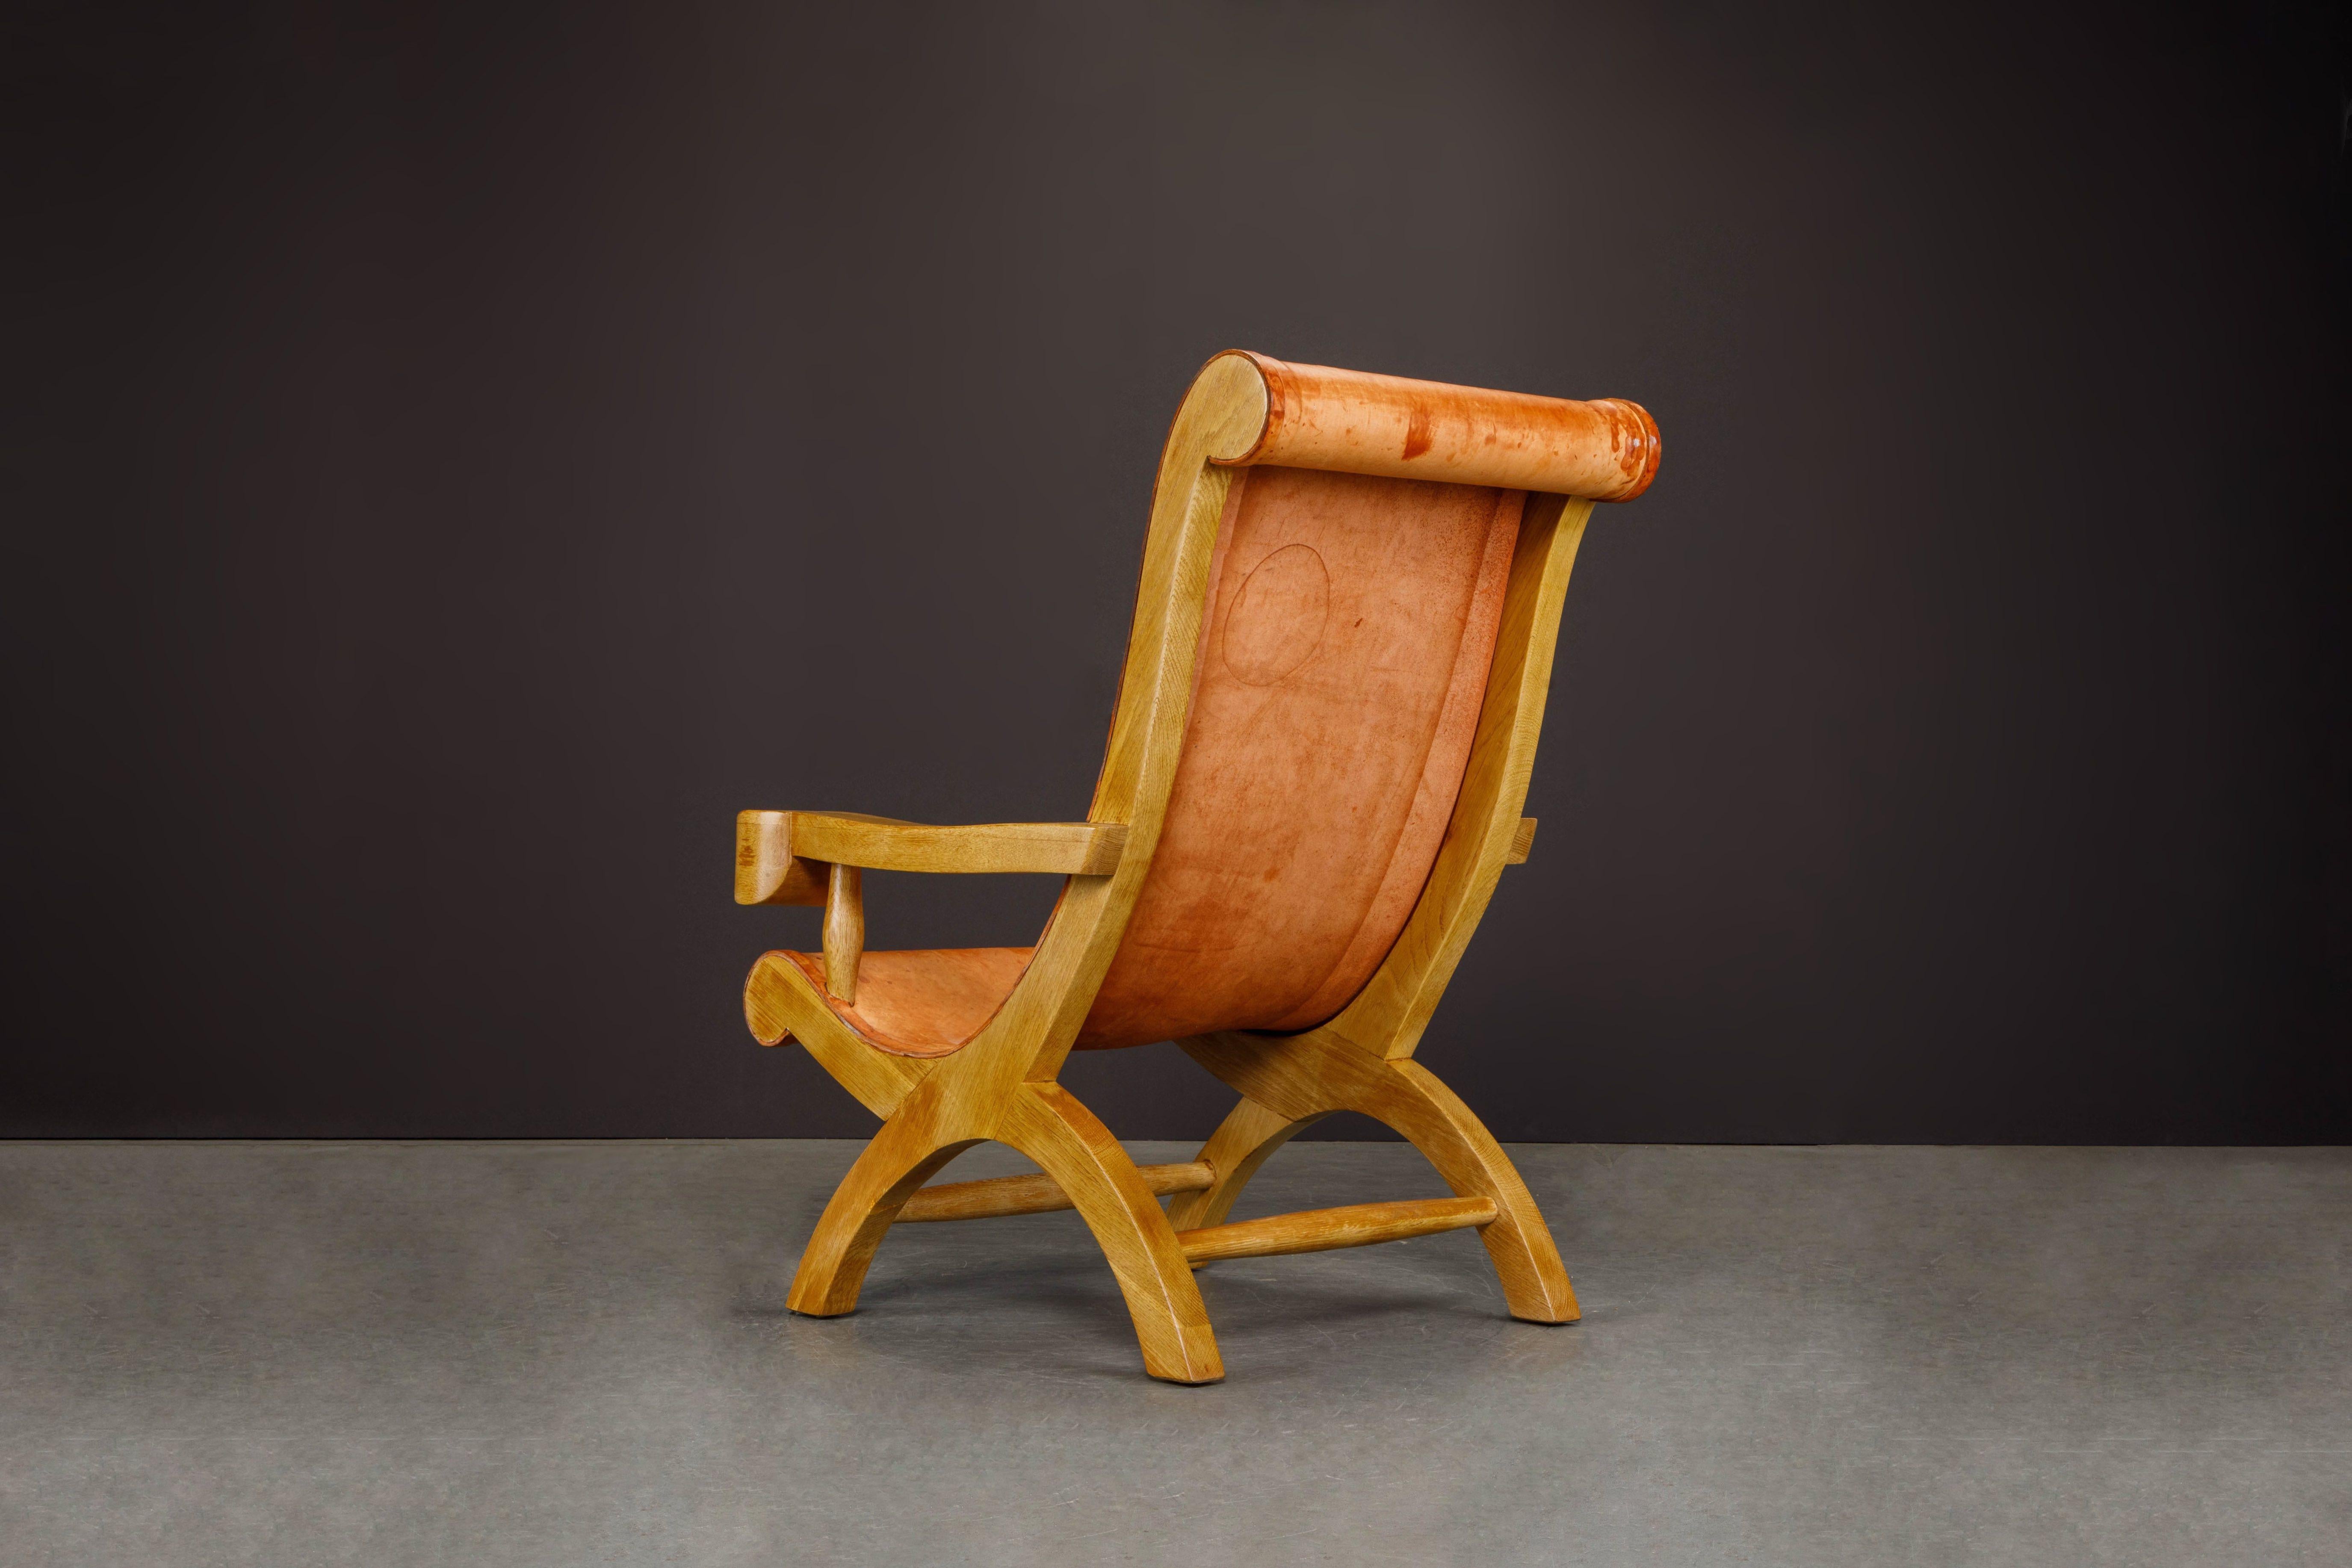 Clara Porset Patinated Leather and Cypress 'Butaque' Armchair, Mexico, c. 1947  5